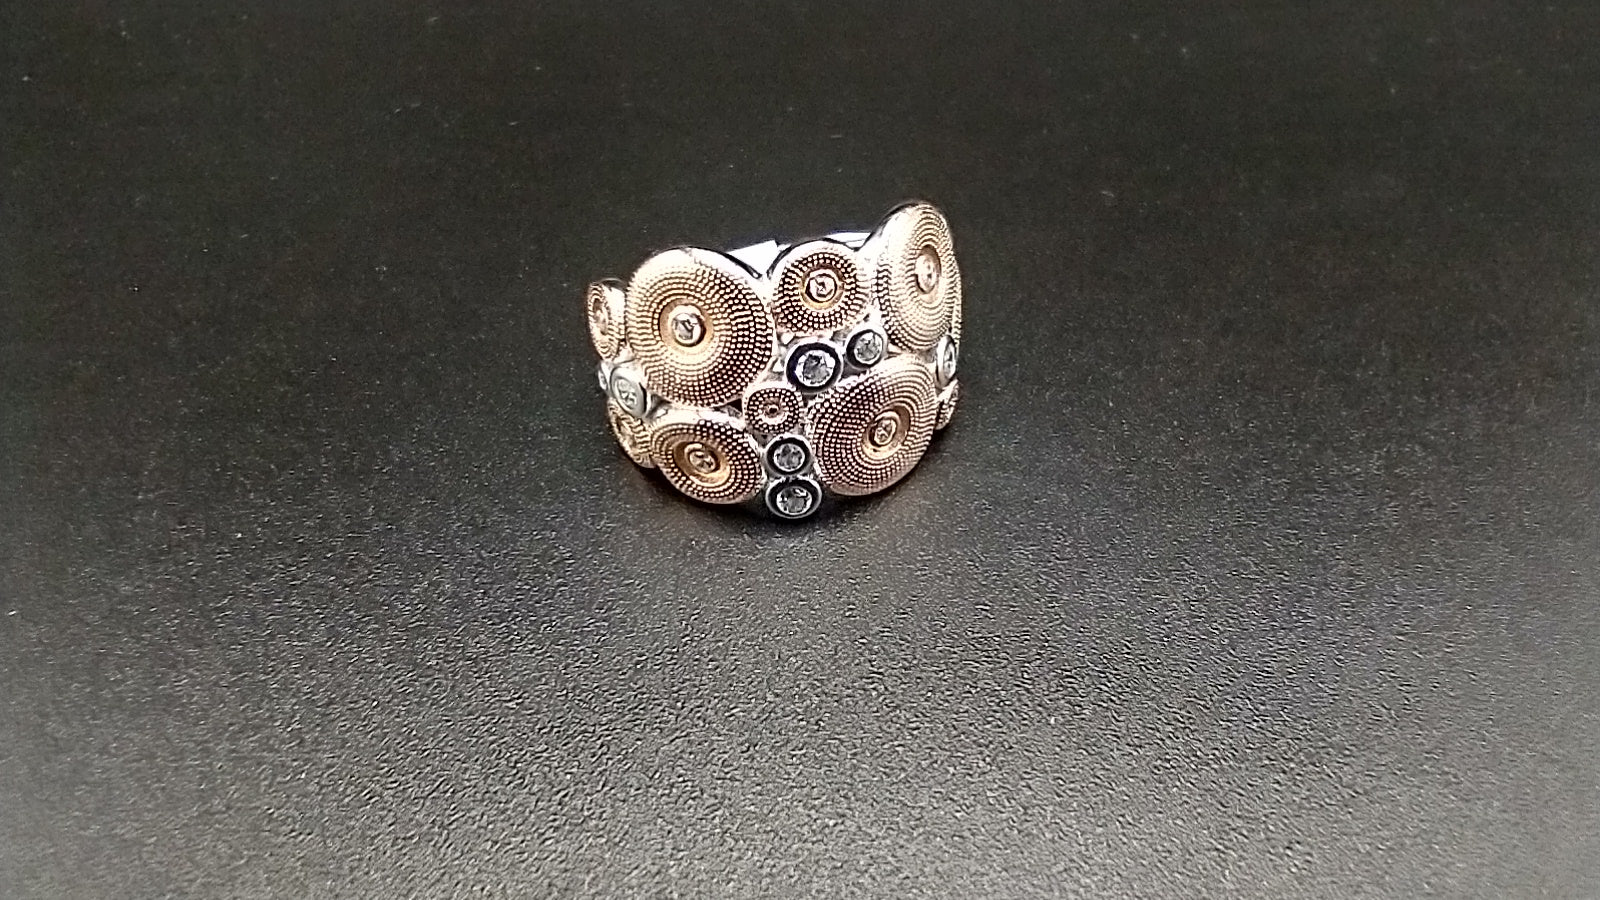 "GEARS" Rose gold/topaz & 925 sterling silver ring size 8....$75.